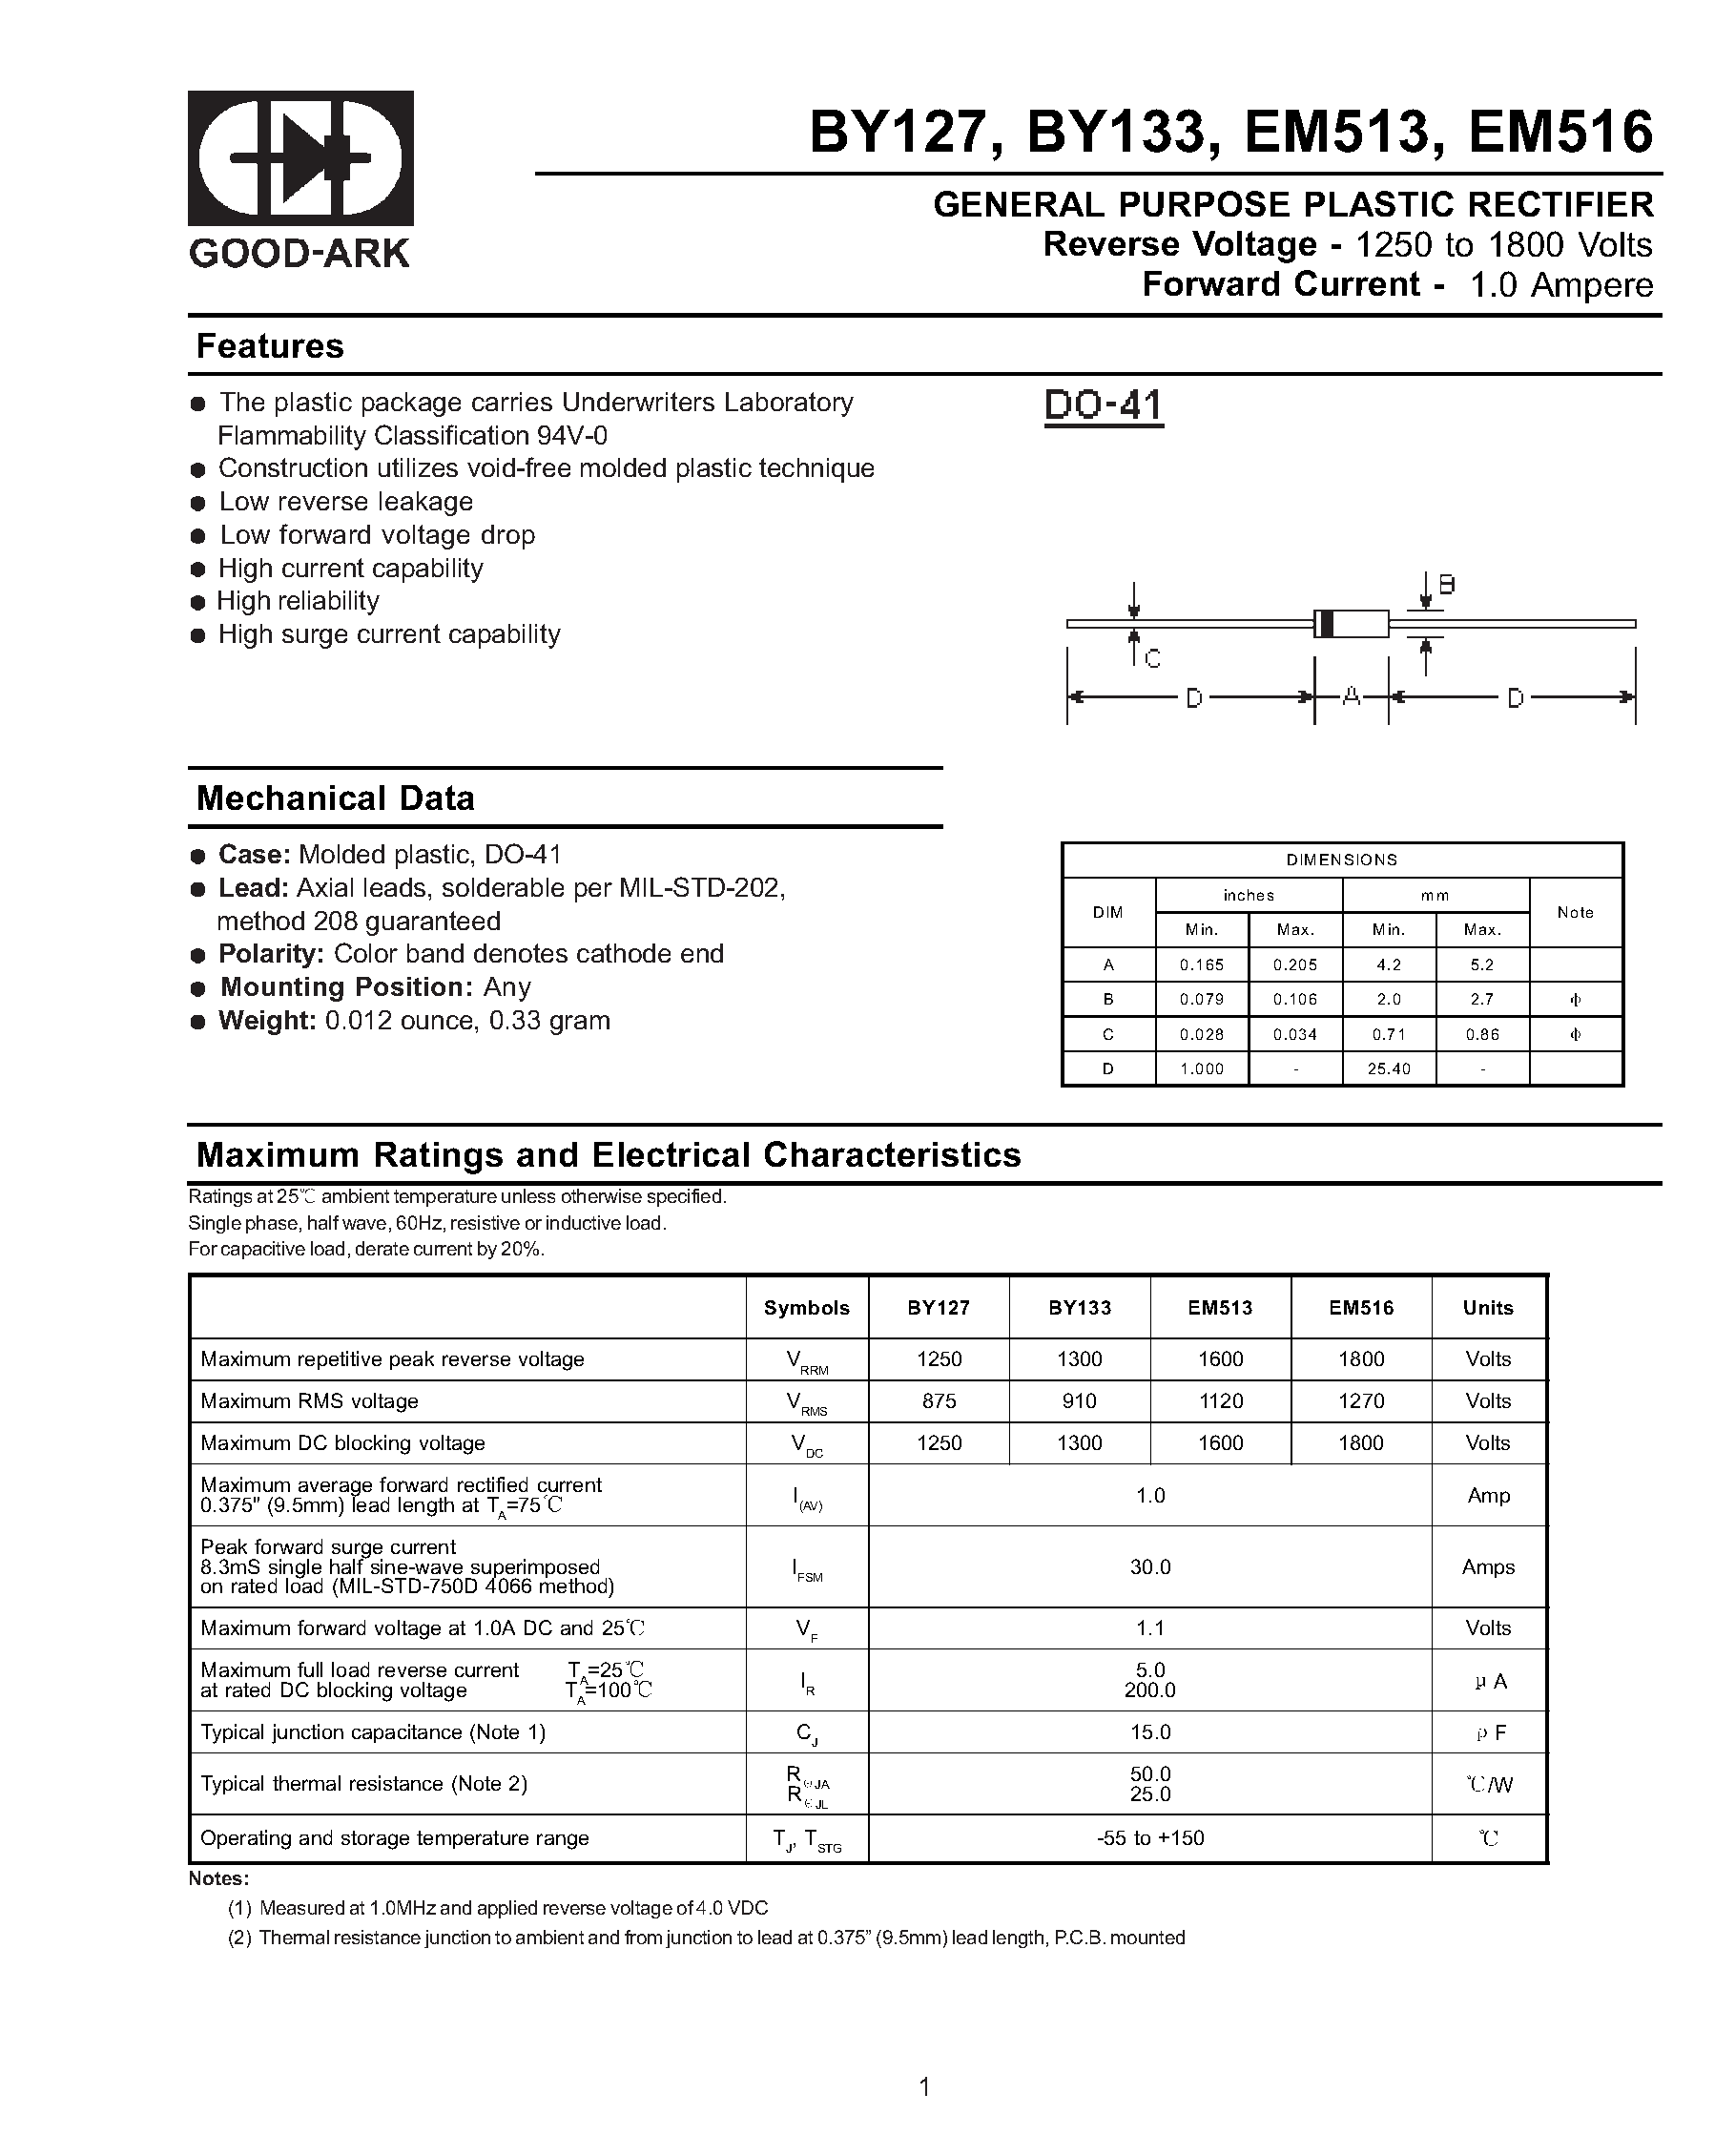 Datasheet BY133 - GENERAL PURPOSE PLASTIC RECTIFIER page 1